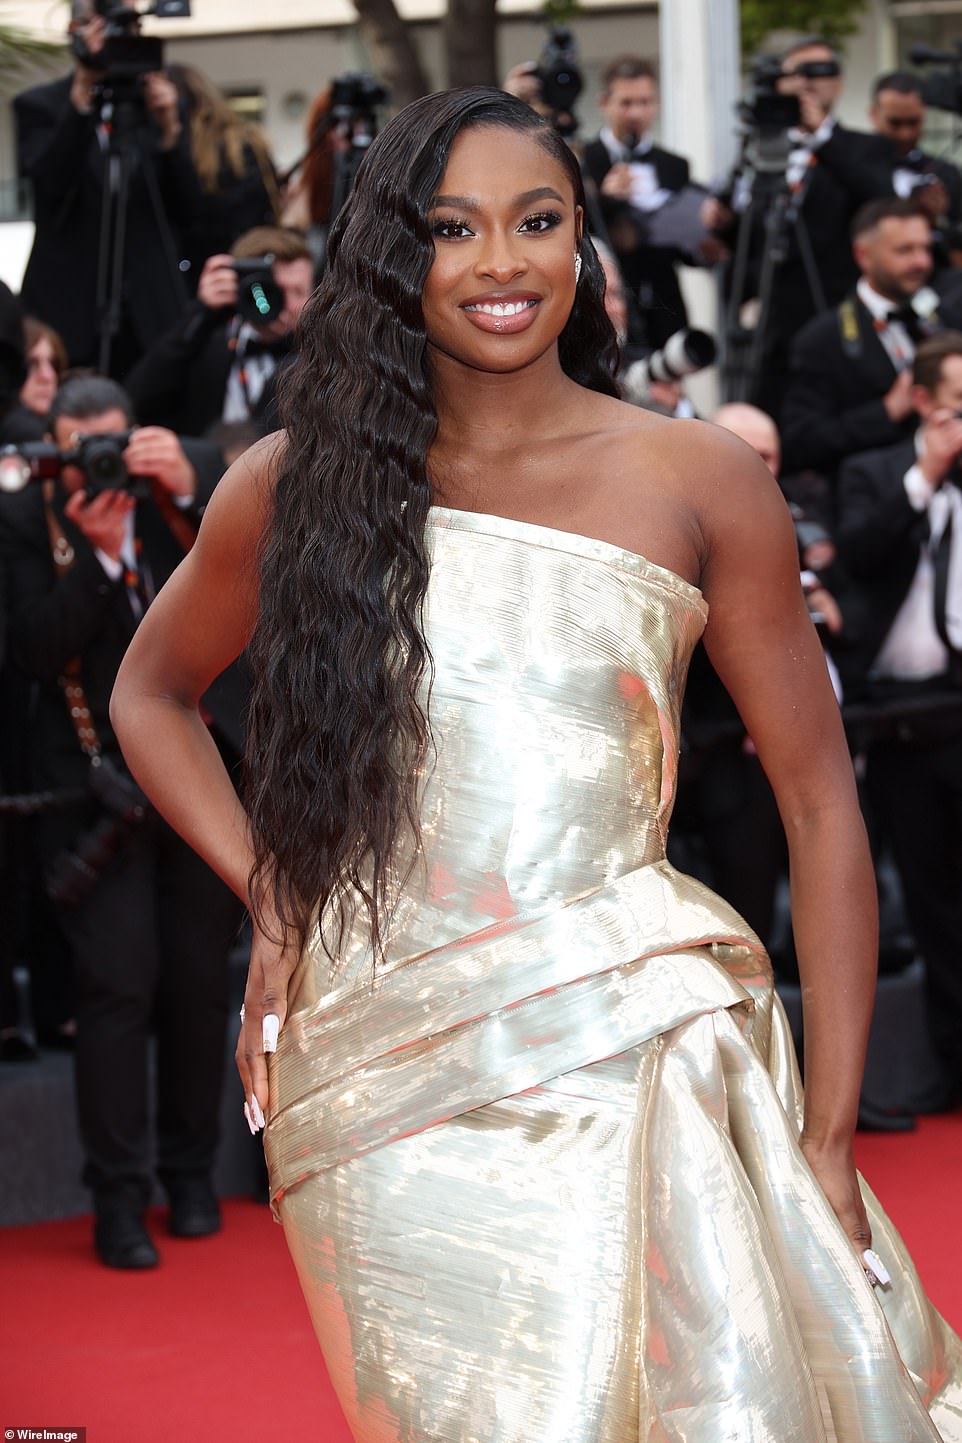 Glowing: Coco put on a stunning display in the strapless shiny gown